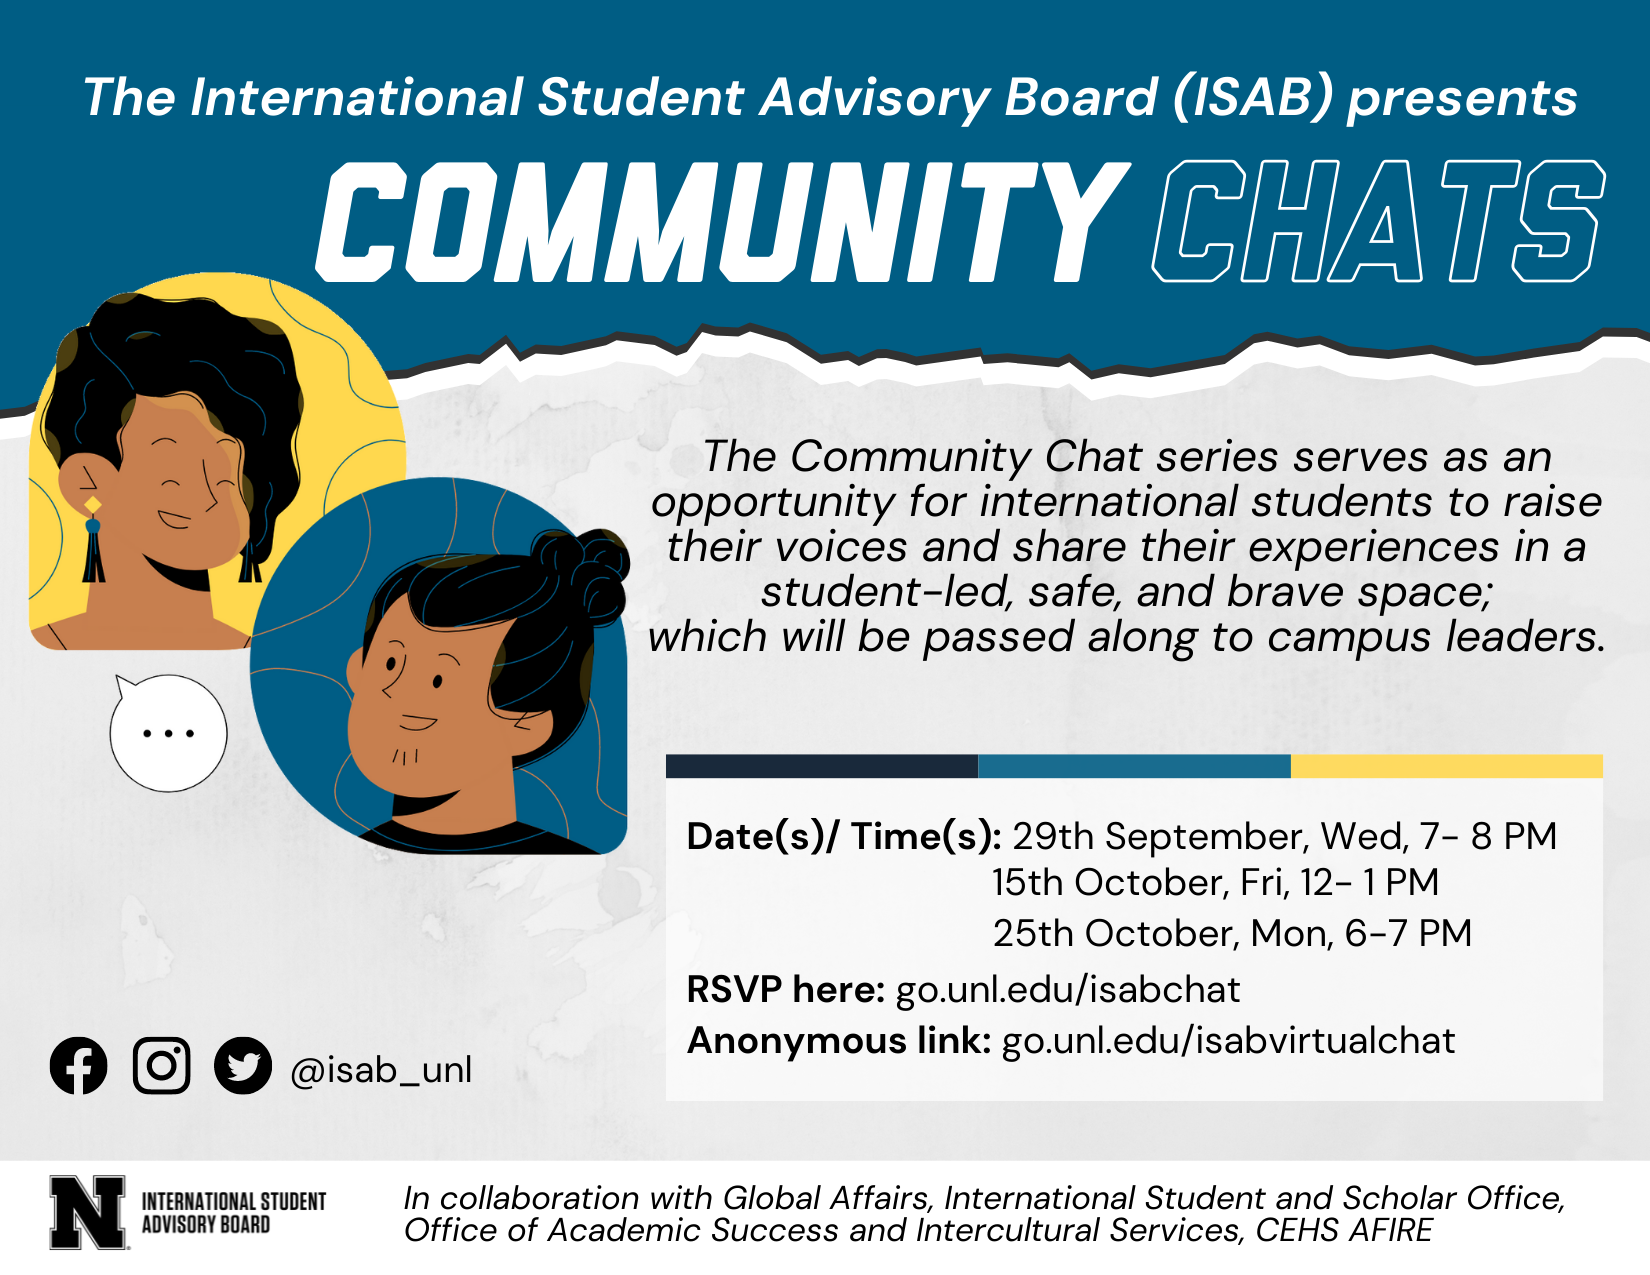 The International Student Advisory Board (ISAB) is hosting a series of Community Chats for international students where students will be able to raise their voices and share their experiences in a student-led, safe, and brave space. 